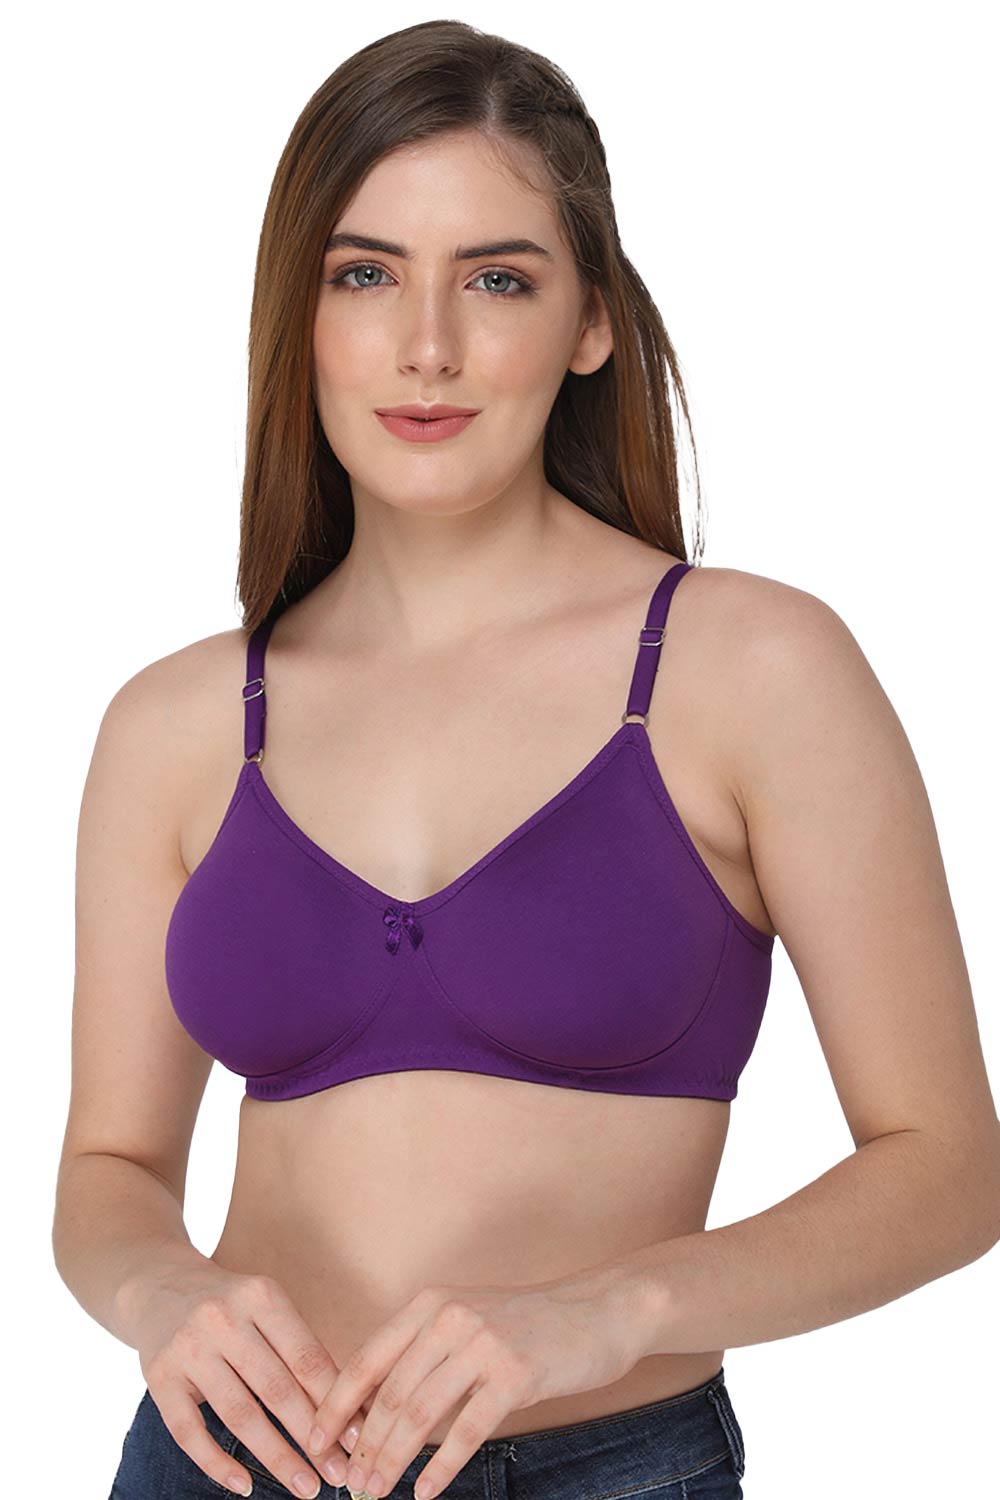 Intimacy Saree Bra Special Combo Pack - IN29 - C42